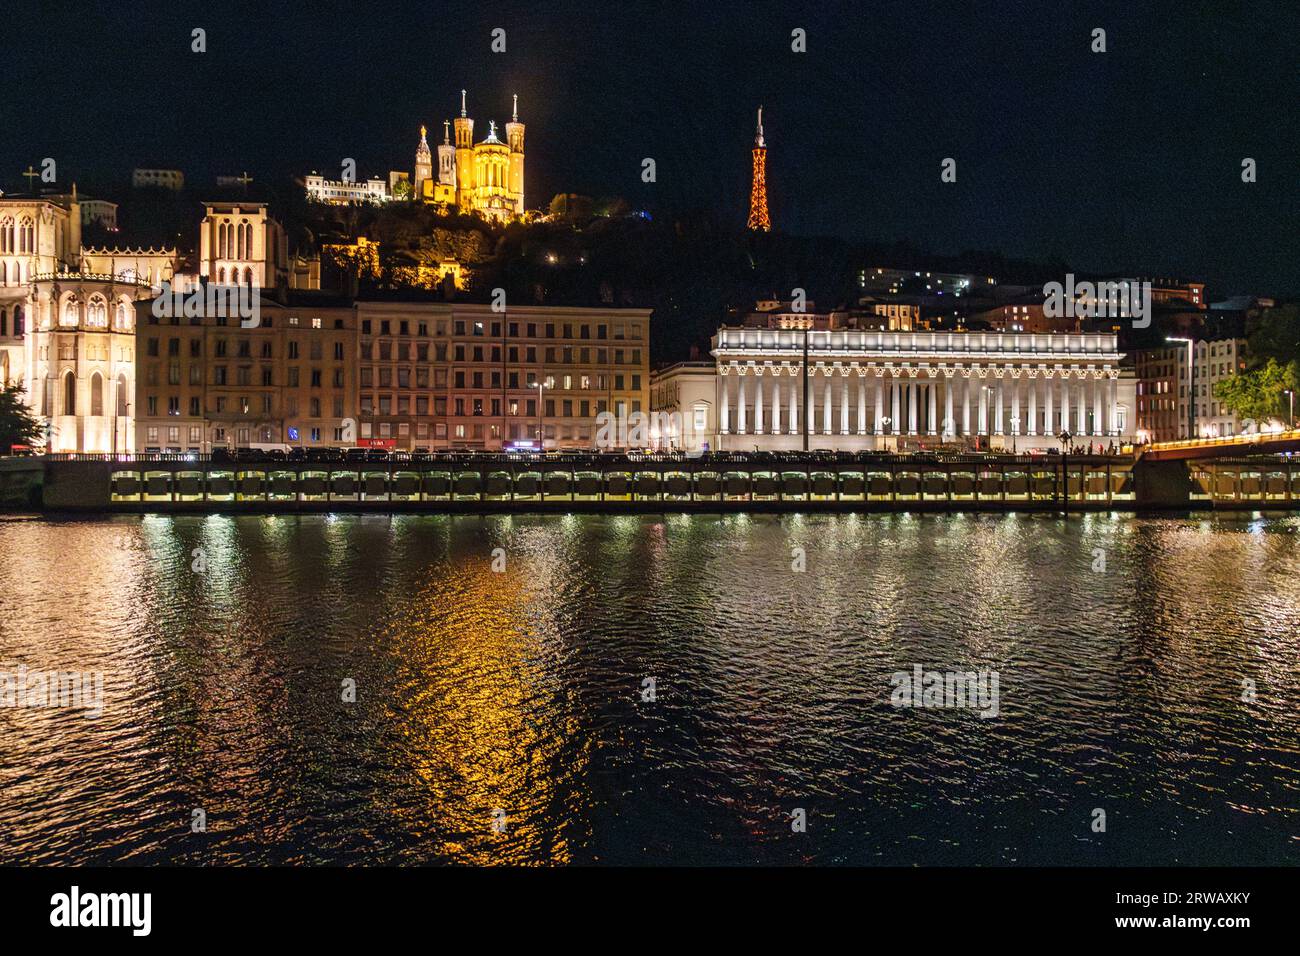 Night view across the River Saone towards Lyon Old Town and the 2 Cathedrals, St Jean Baptiste and Basilica Saint Jean Baptiste. Stock Photo